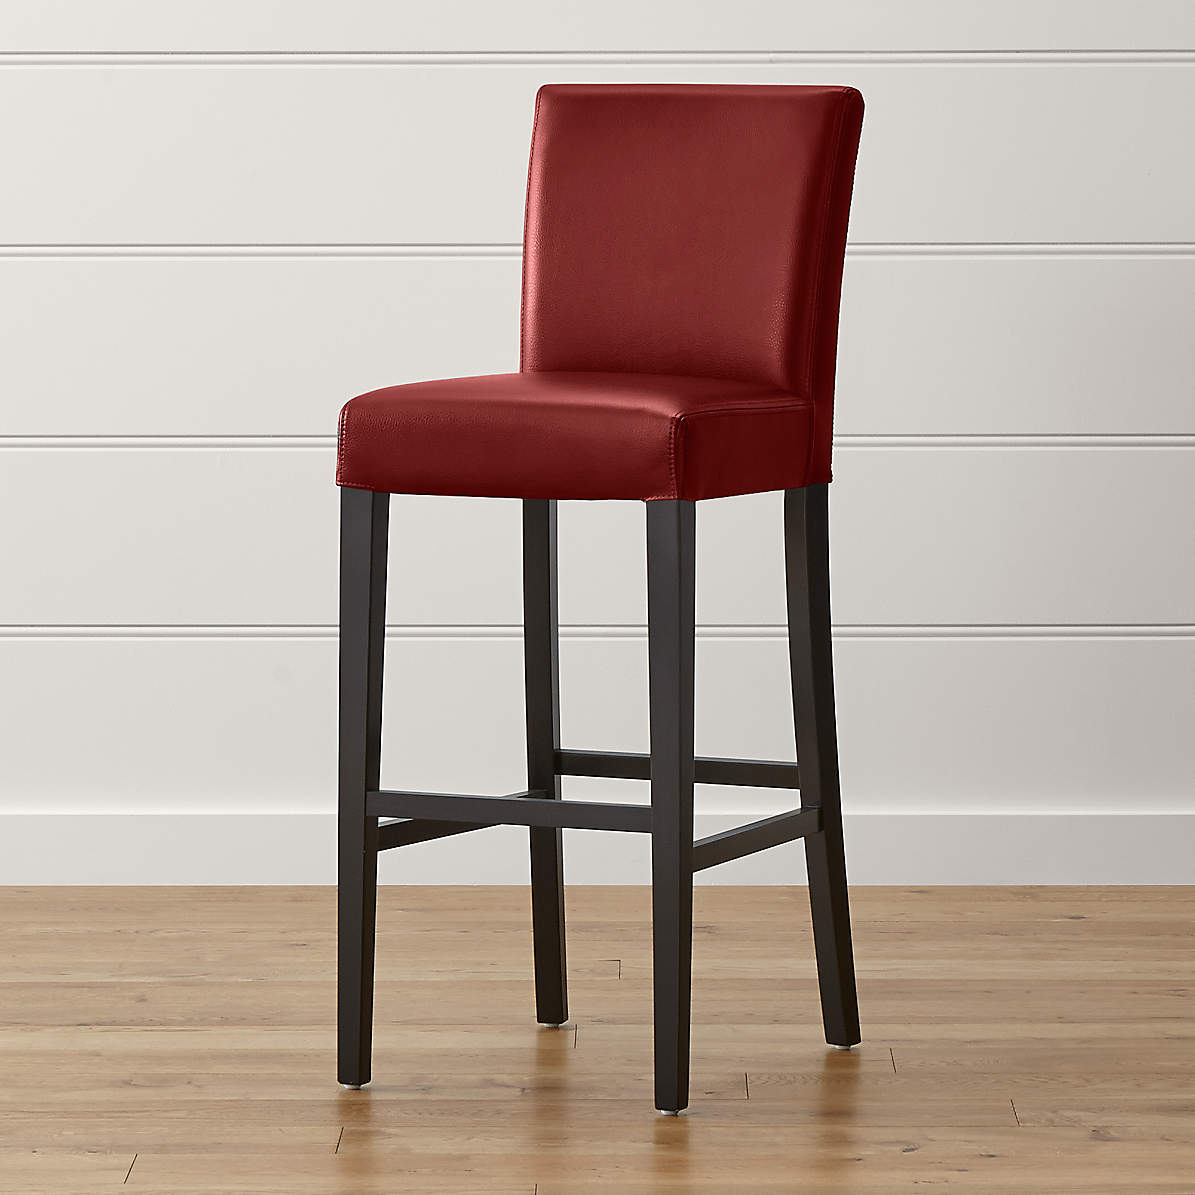 Lowe Red Leather Bar Stool Reviews, Red Leather Backless Bar Stools